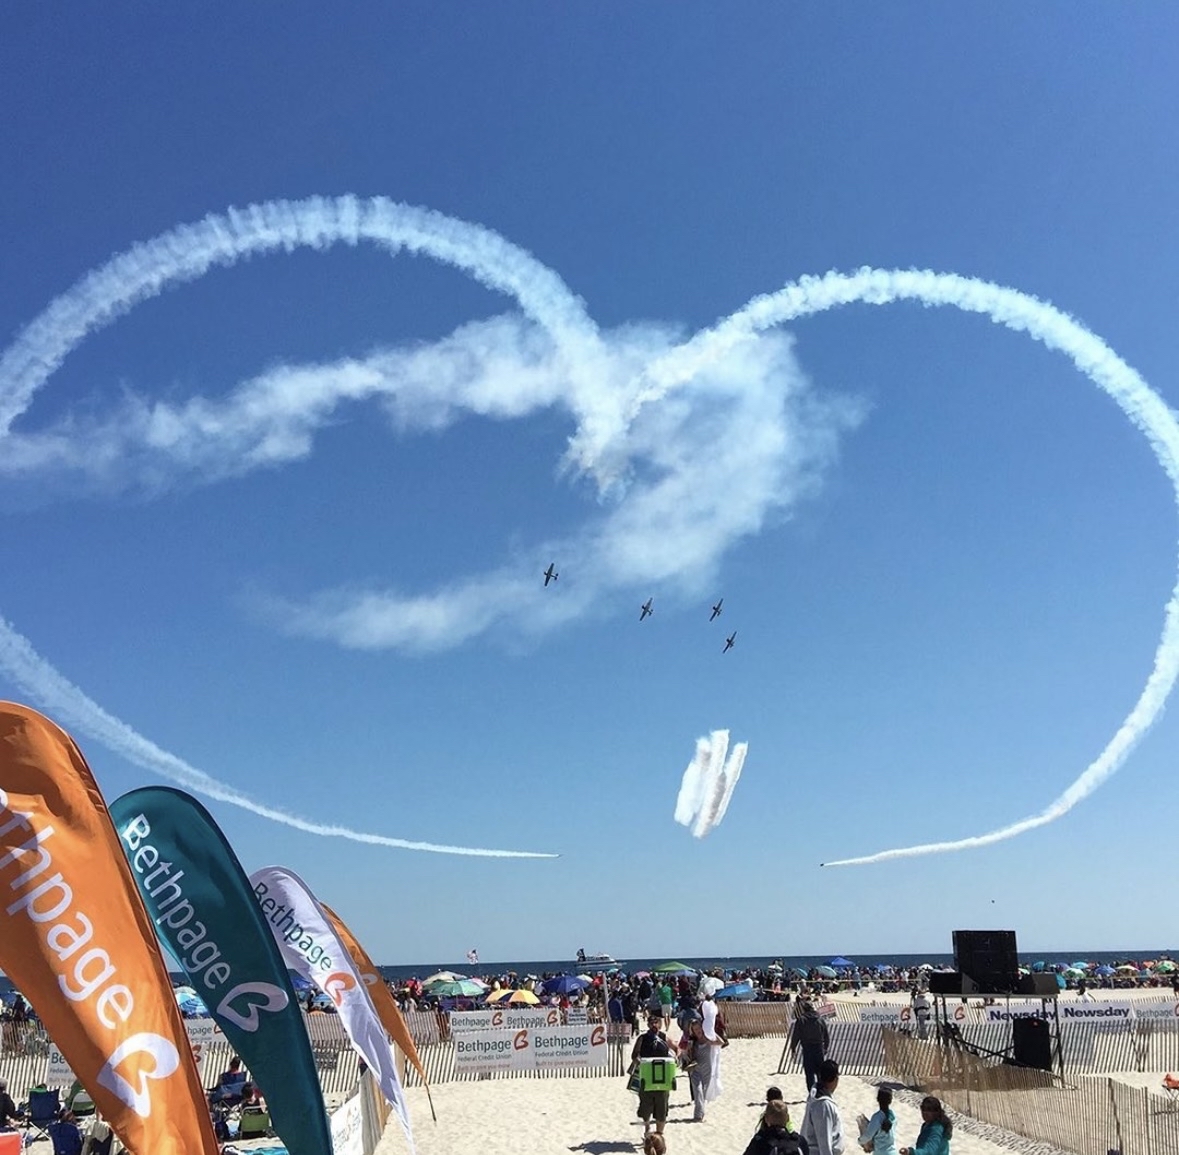 The @bethpageairshow is celebrating the 20th anniversary this weekend at Jones Beach! 🫶✈️🏖️🇺🇸 #discoverlongisland #MDW (5/25 & 5/26) This will be the Blue Angels’ 10th headliner performance for what has grown into one of the most respected air shows in the country.